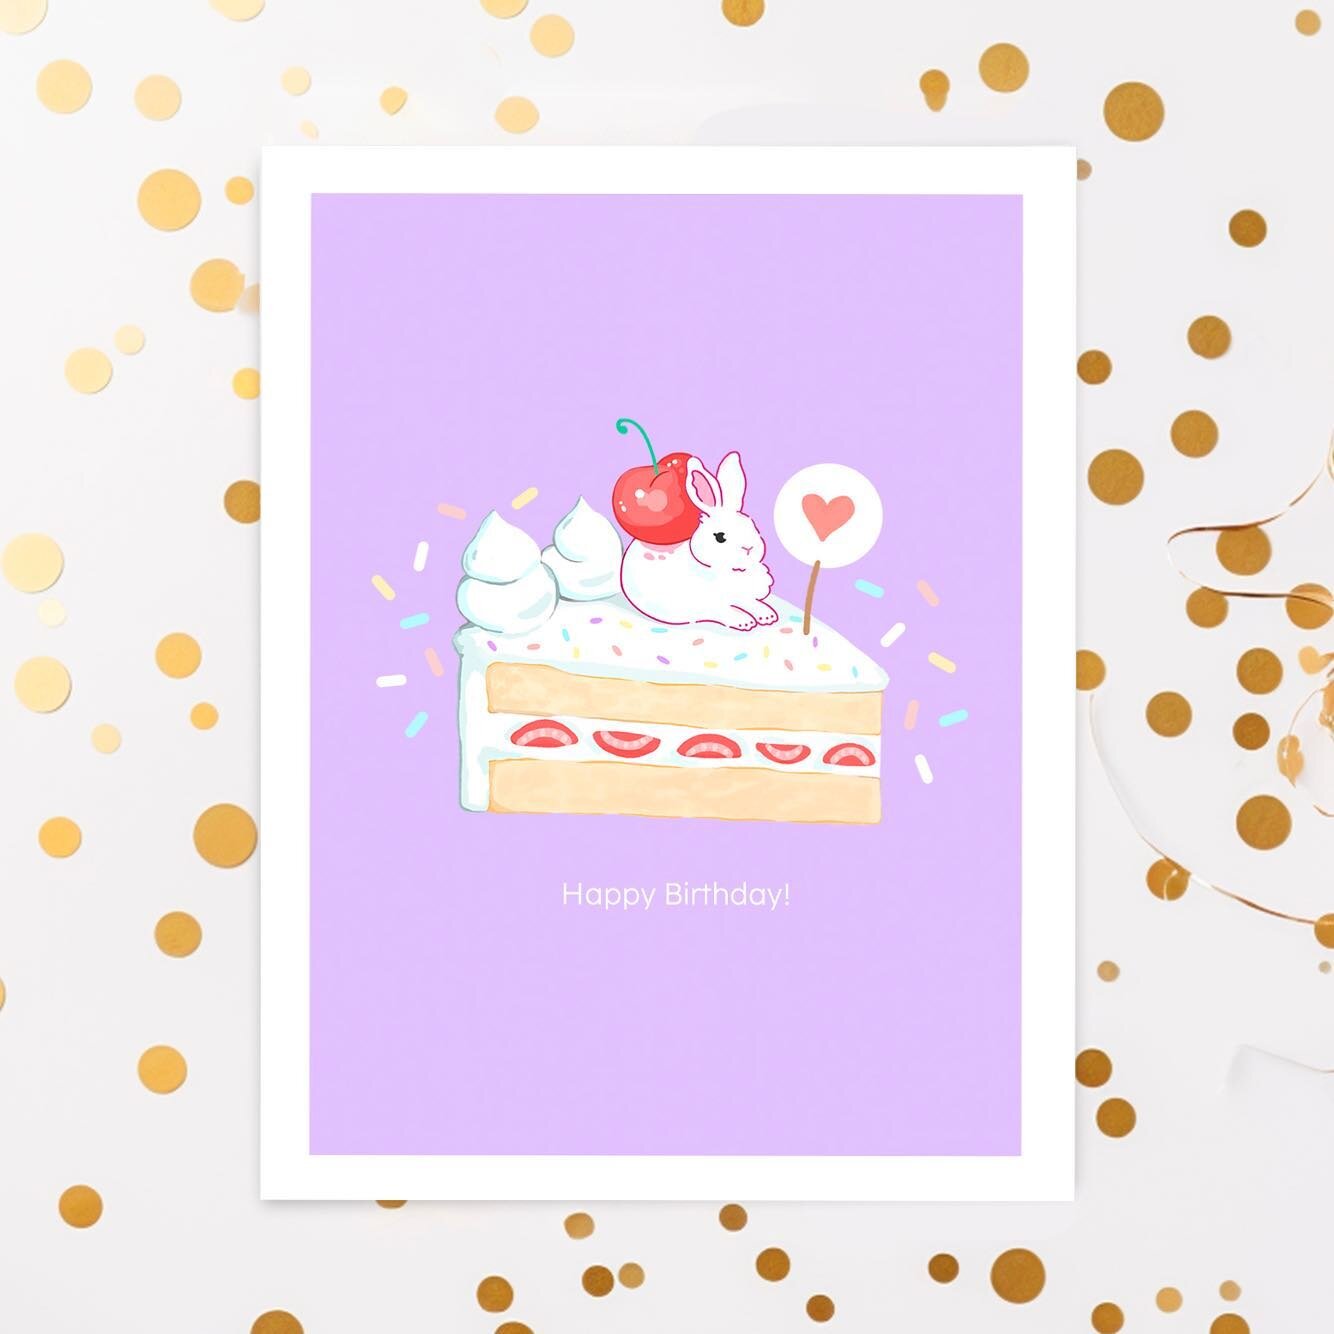 Everyone needs a good slice of cake with the cutest bun wishing you a Happy Birthday 🍰 🎈 New greeting card added to the collection! This will also be a new vinyl sticker :) All I want to do is paint desserts and bunnies lol #greetingcarddesign #gre